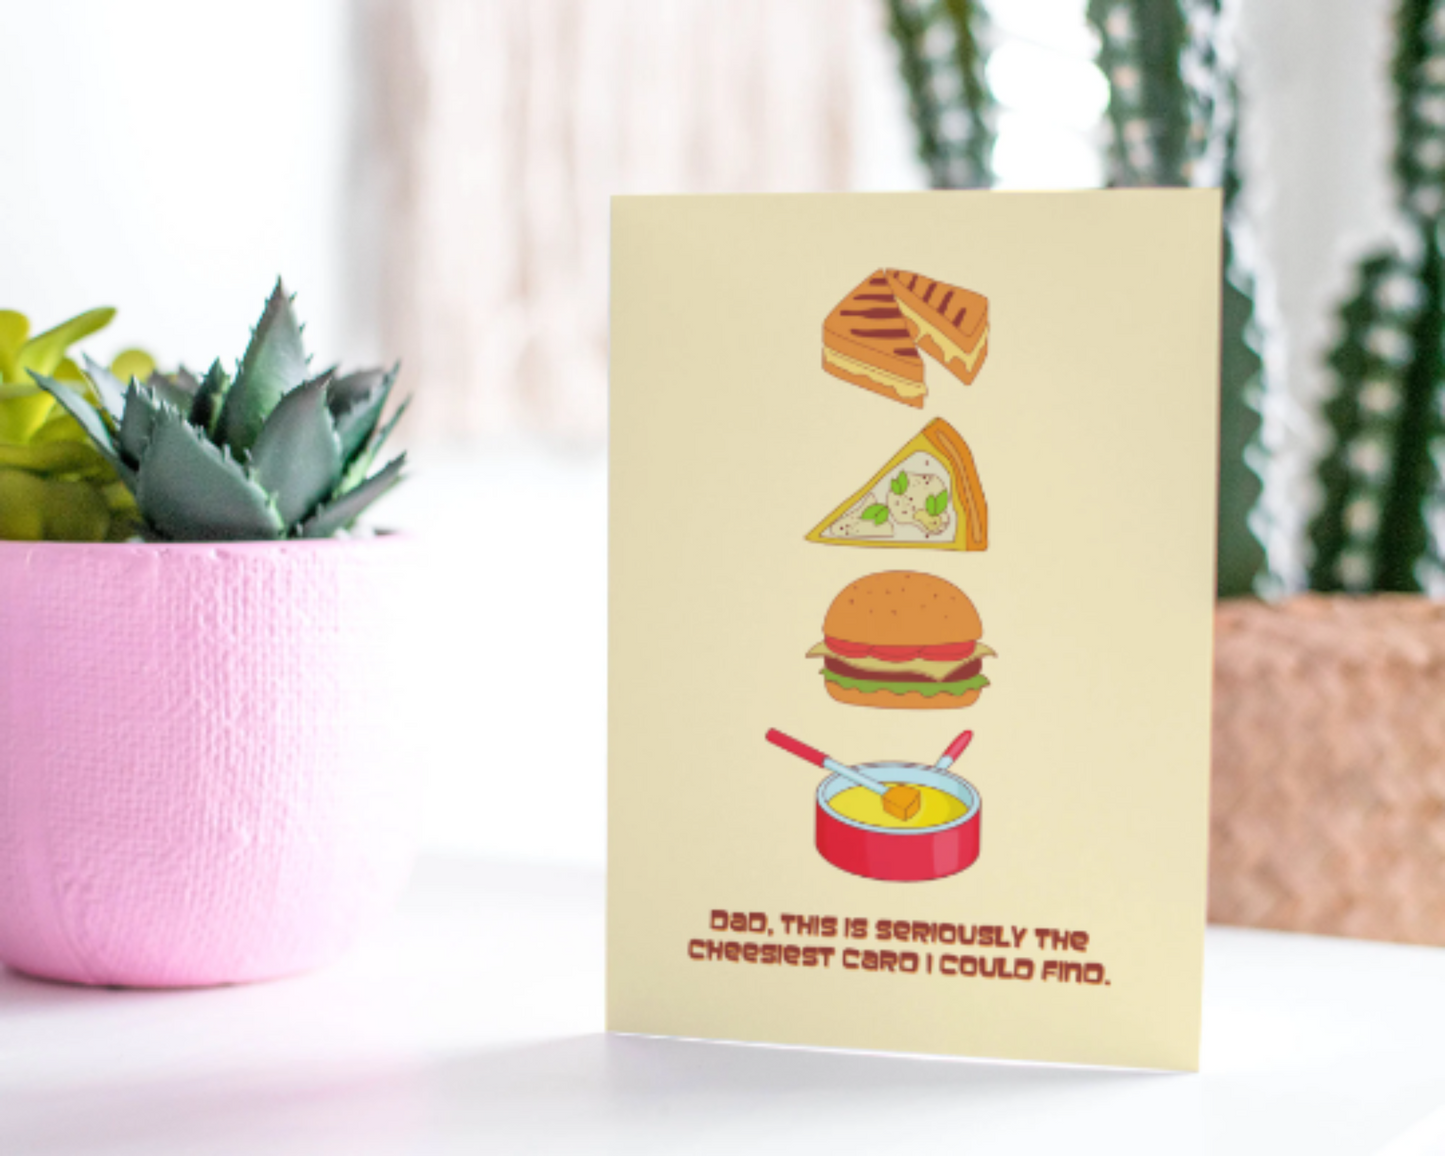 Dad, This Is The Cheesiest Card I Could Find - Funny Father's Day Greeting Card